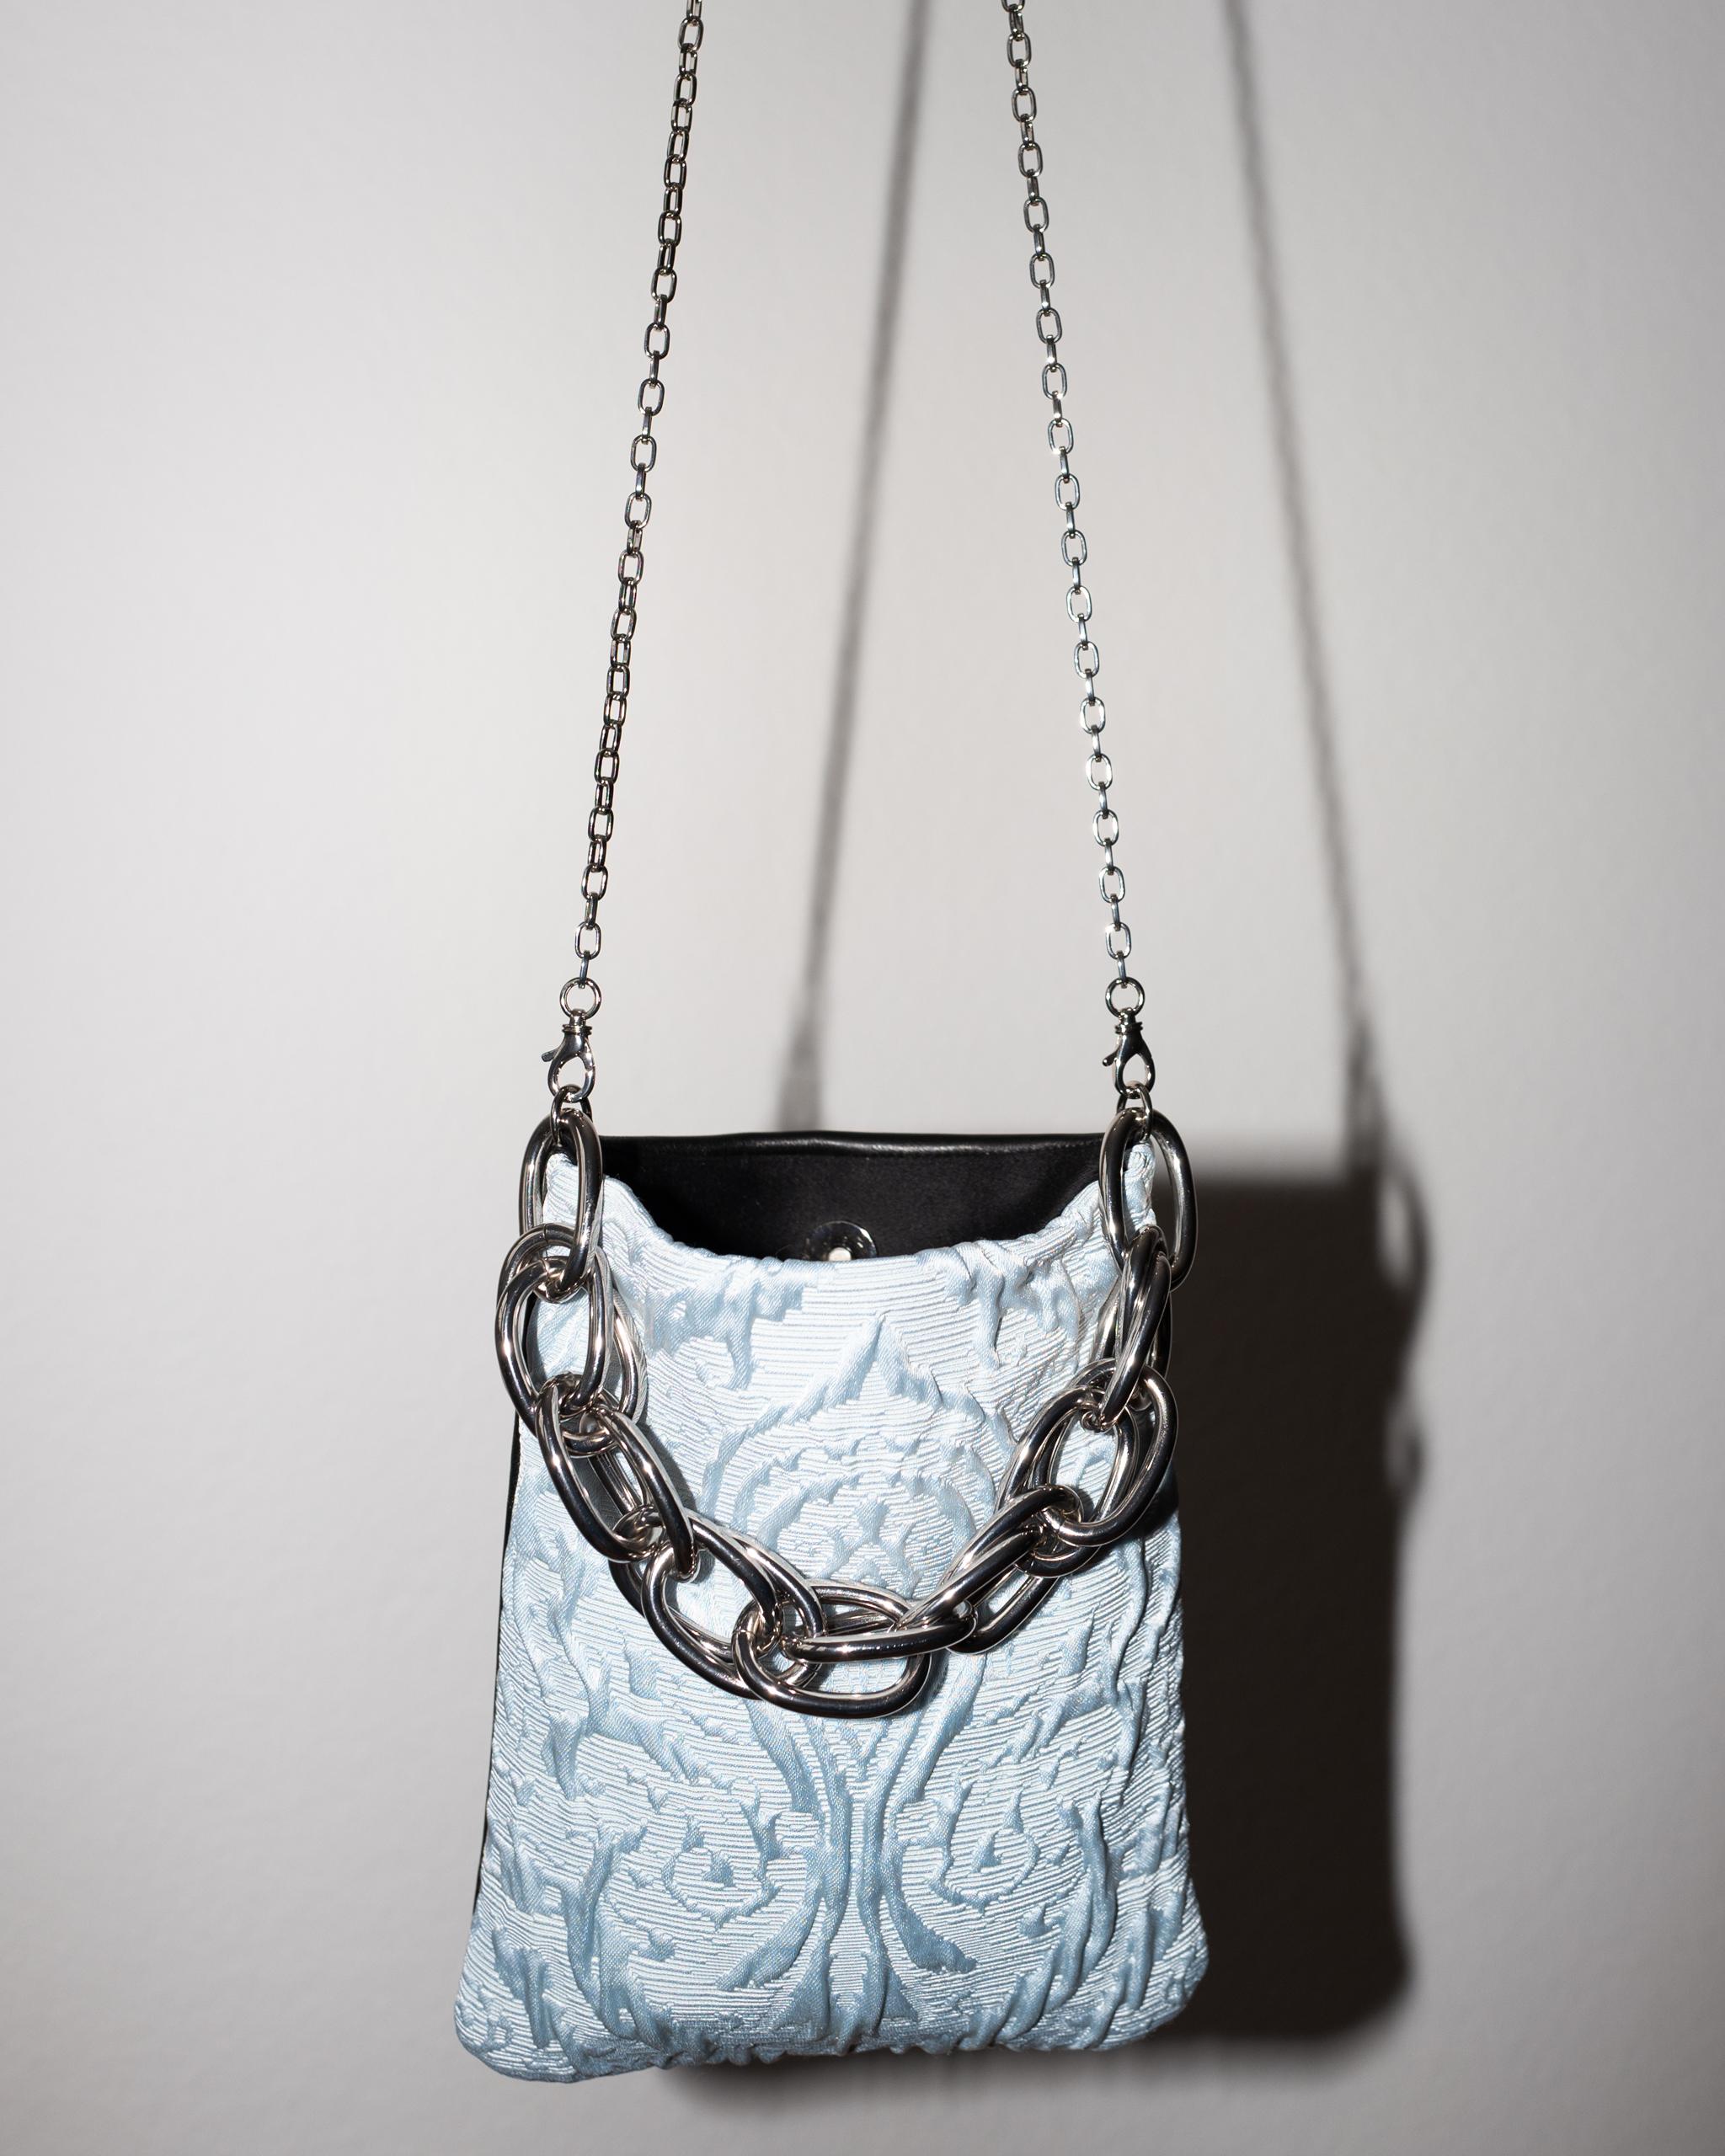 One of a kind Evening Light Blue Vintage Floral Brocade Black Leather Evening Shoulder Bag with Chunky Chain Handle and Long Chain in Palladium Plated Brass J Dauphin

Size: Height 21 cm, Width 17 cm, Length of Chain including Hooks 111 cm

Brand: J